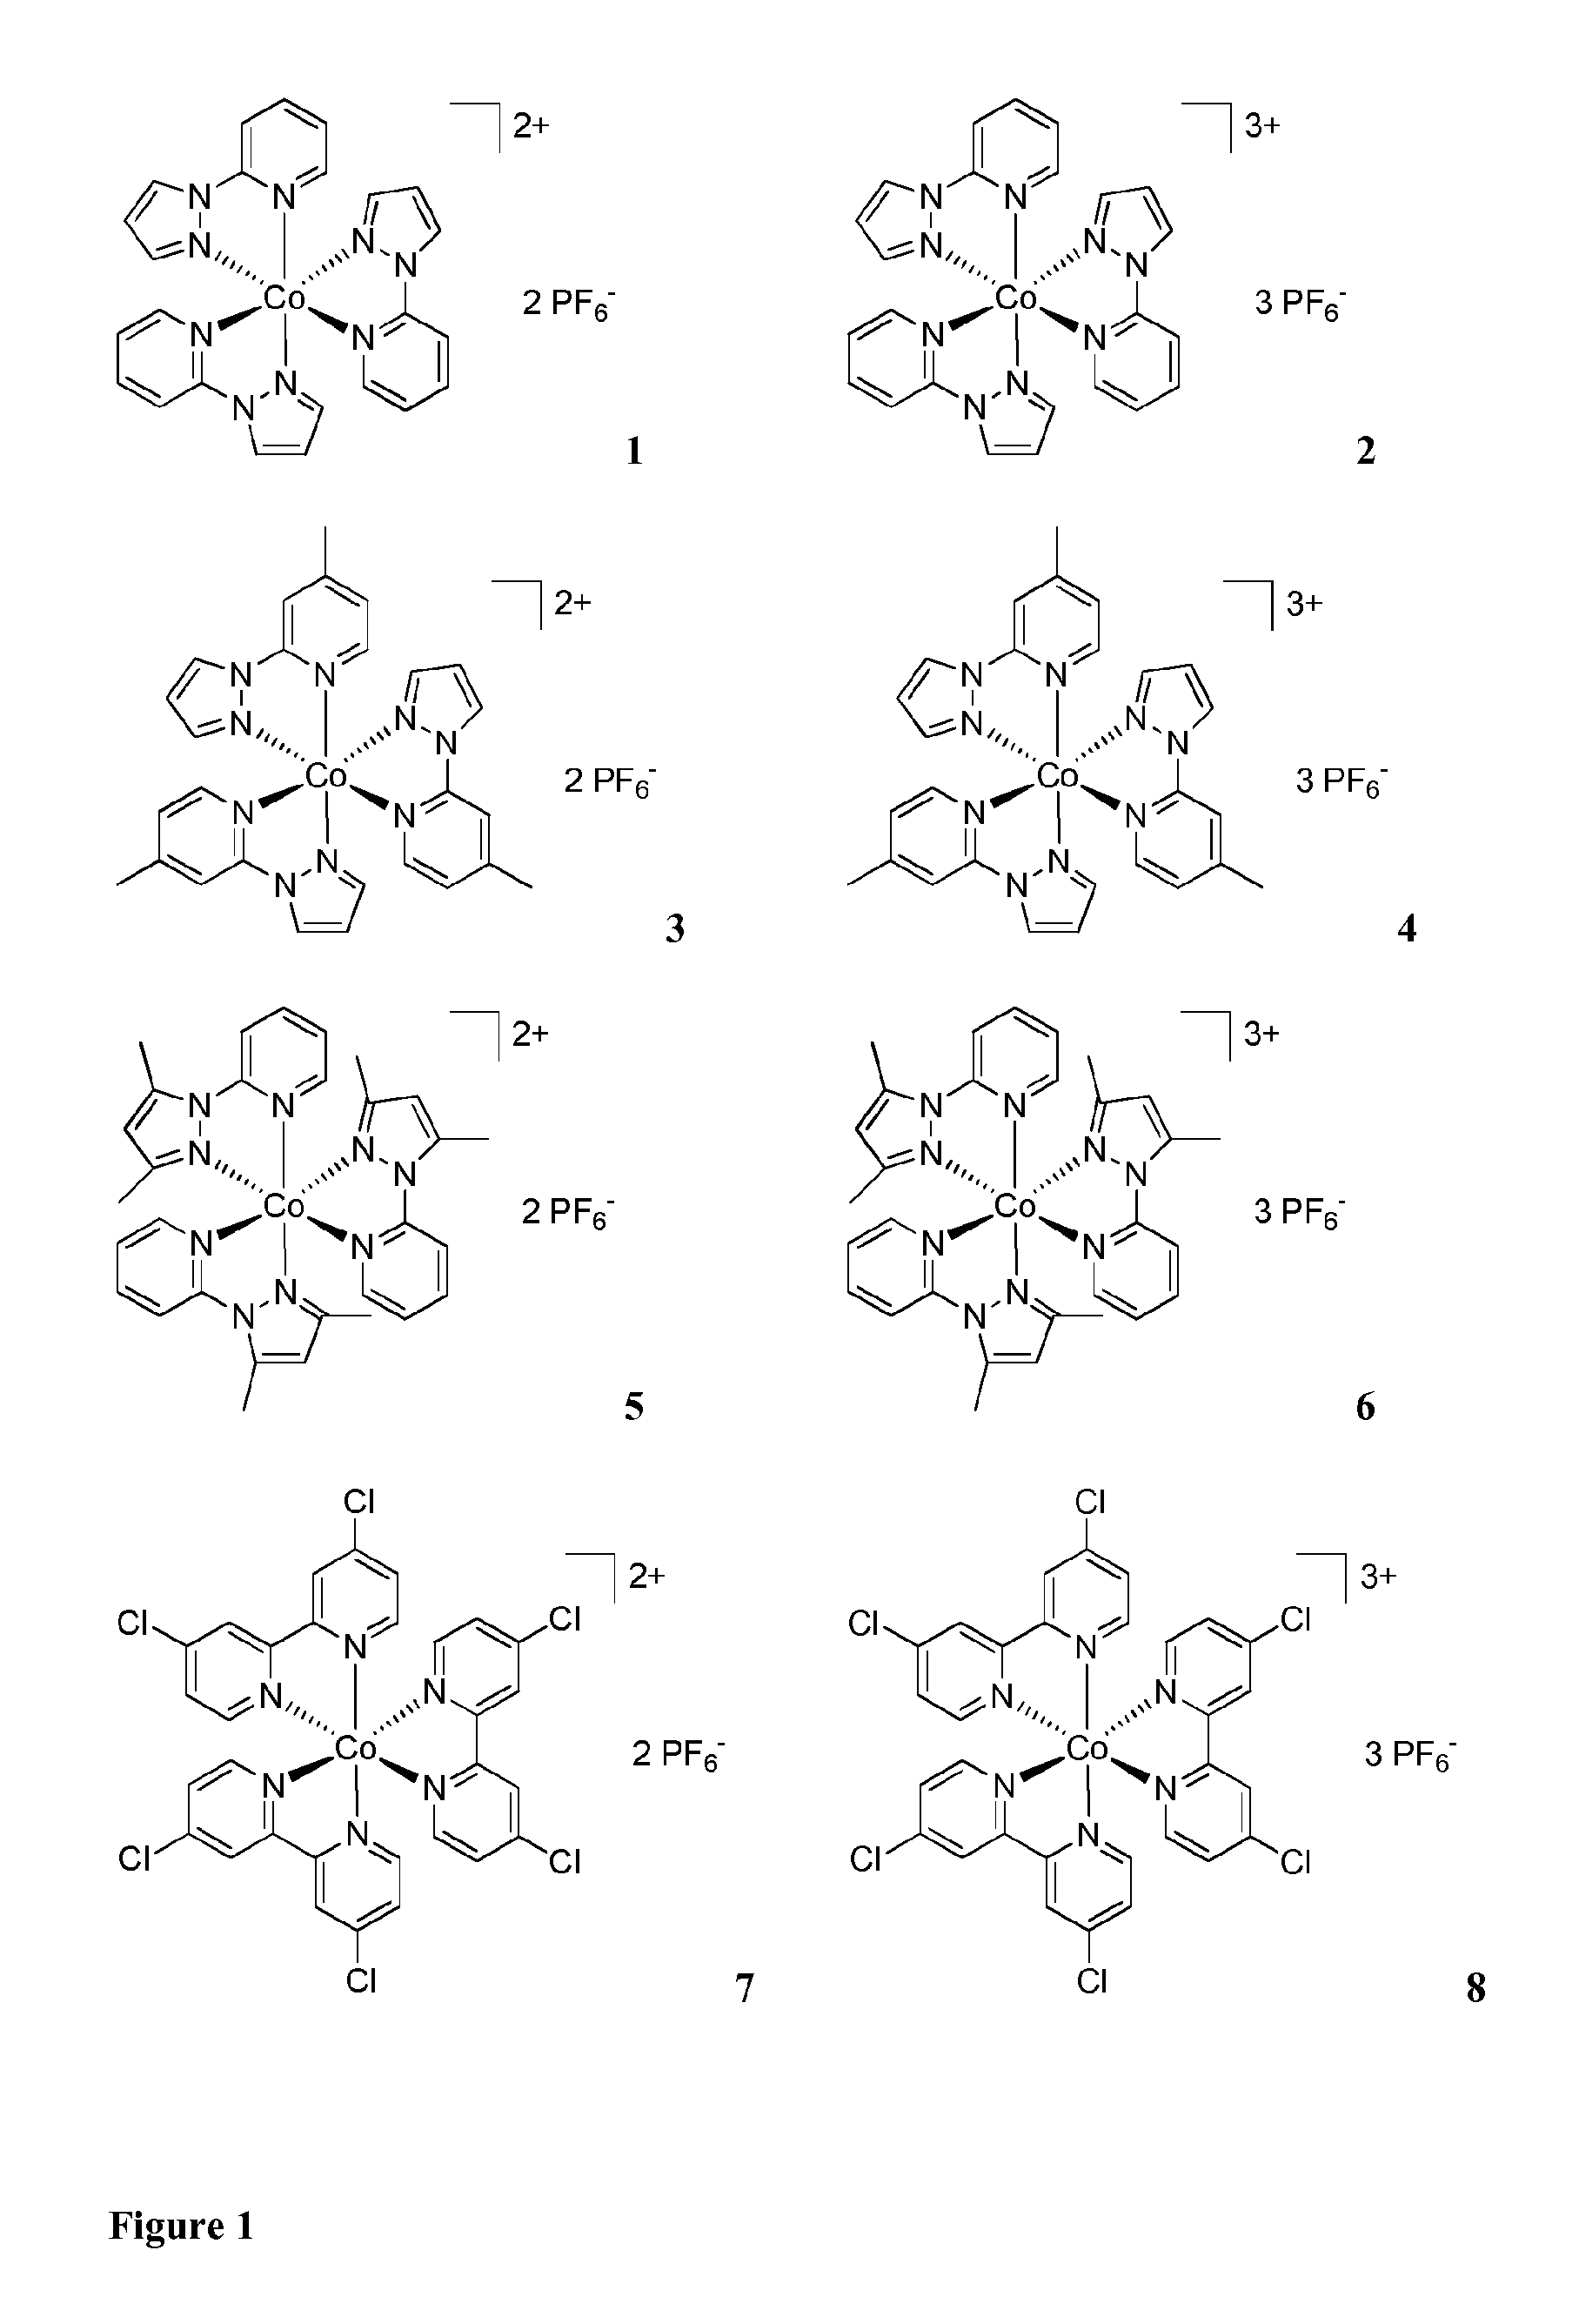 Metal complexes for use as dopants and other uses